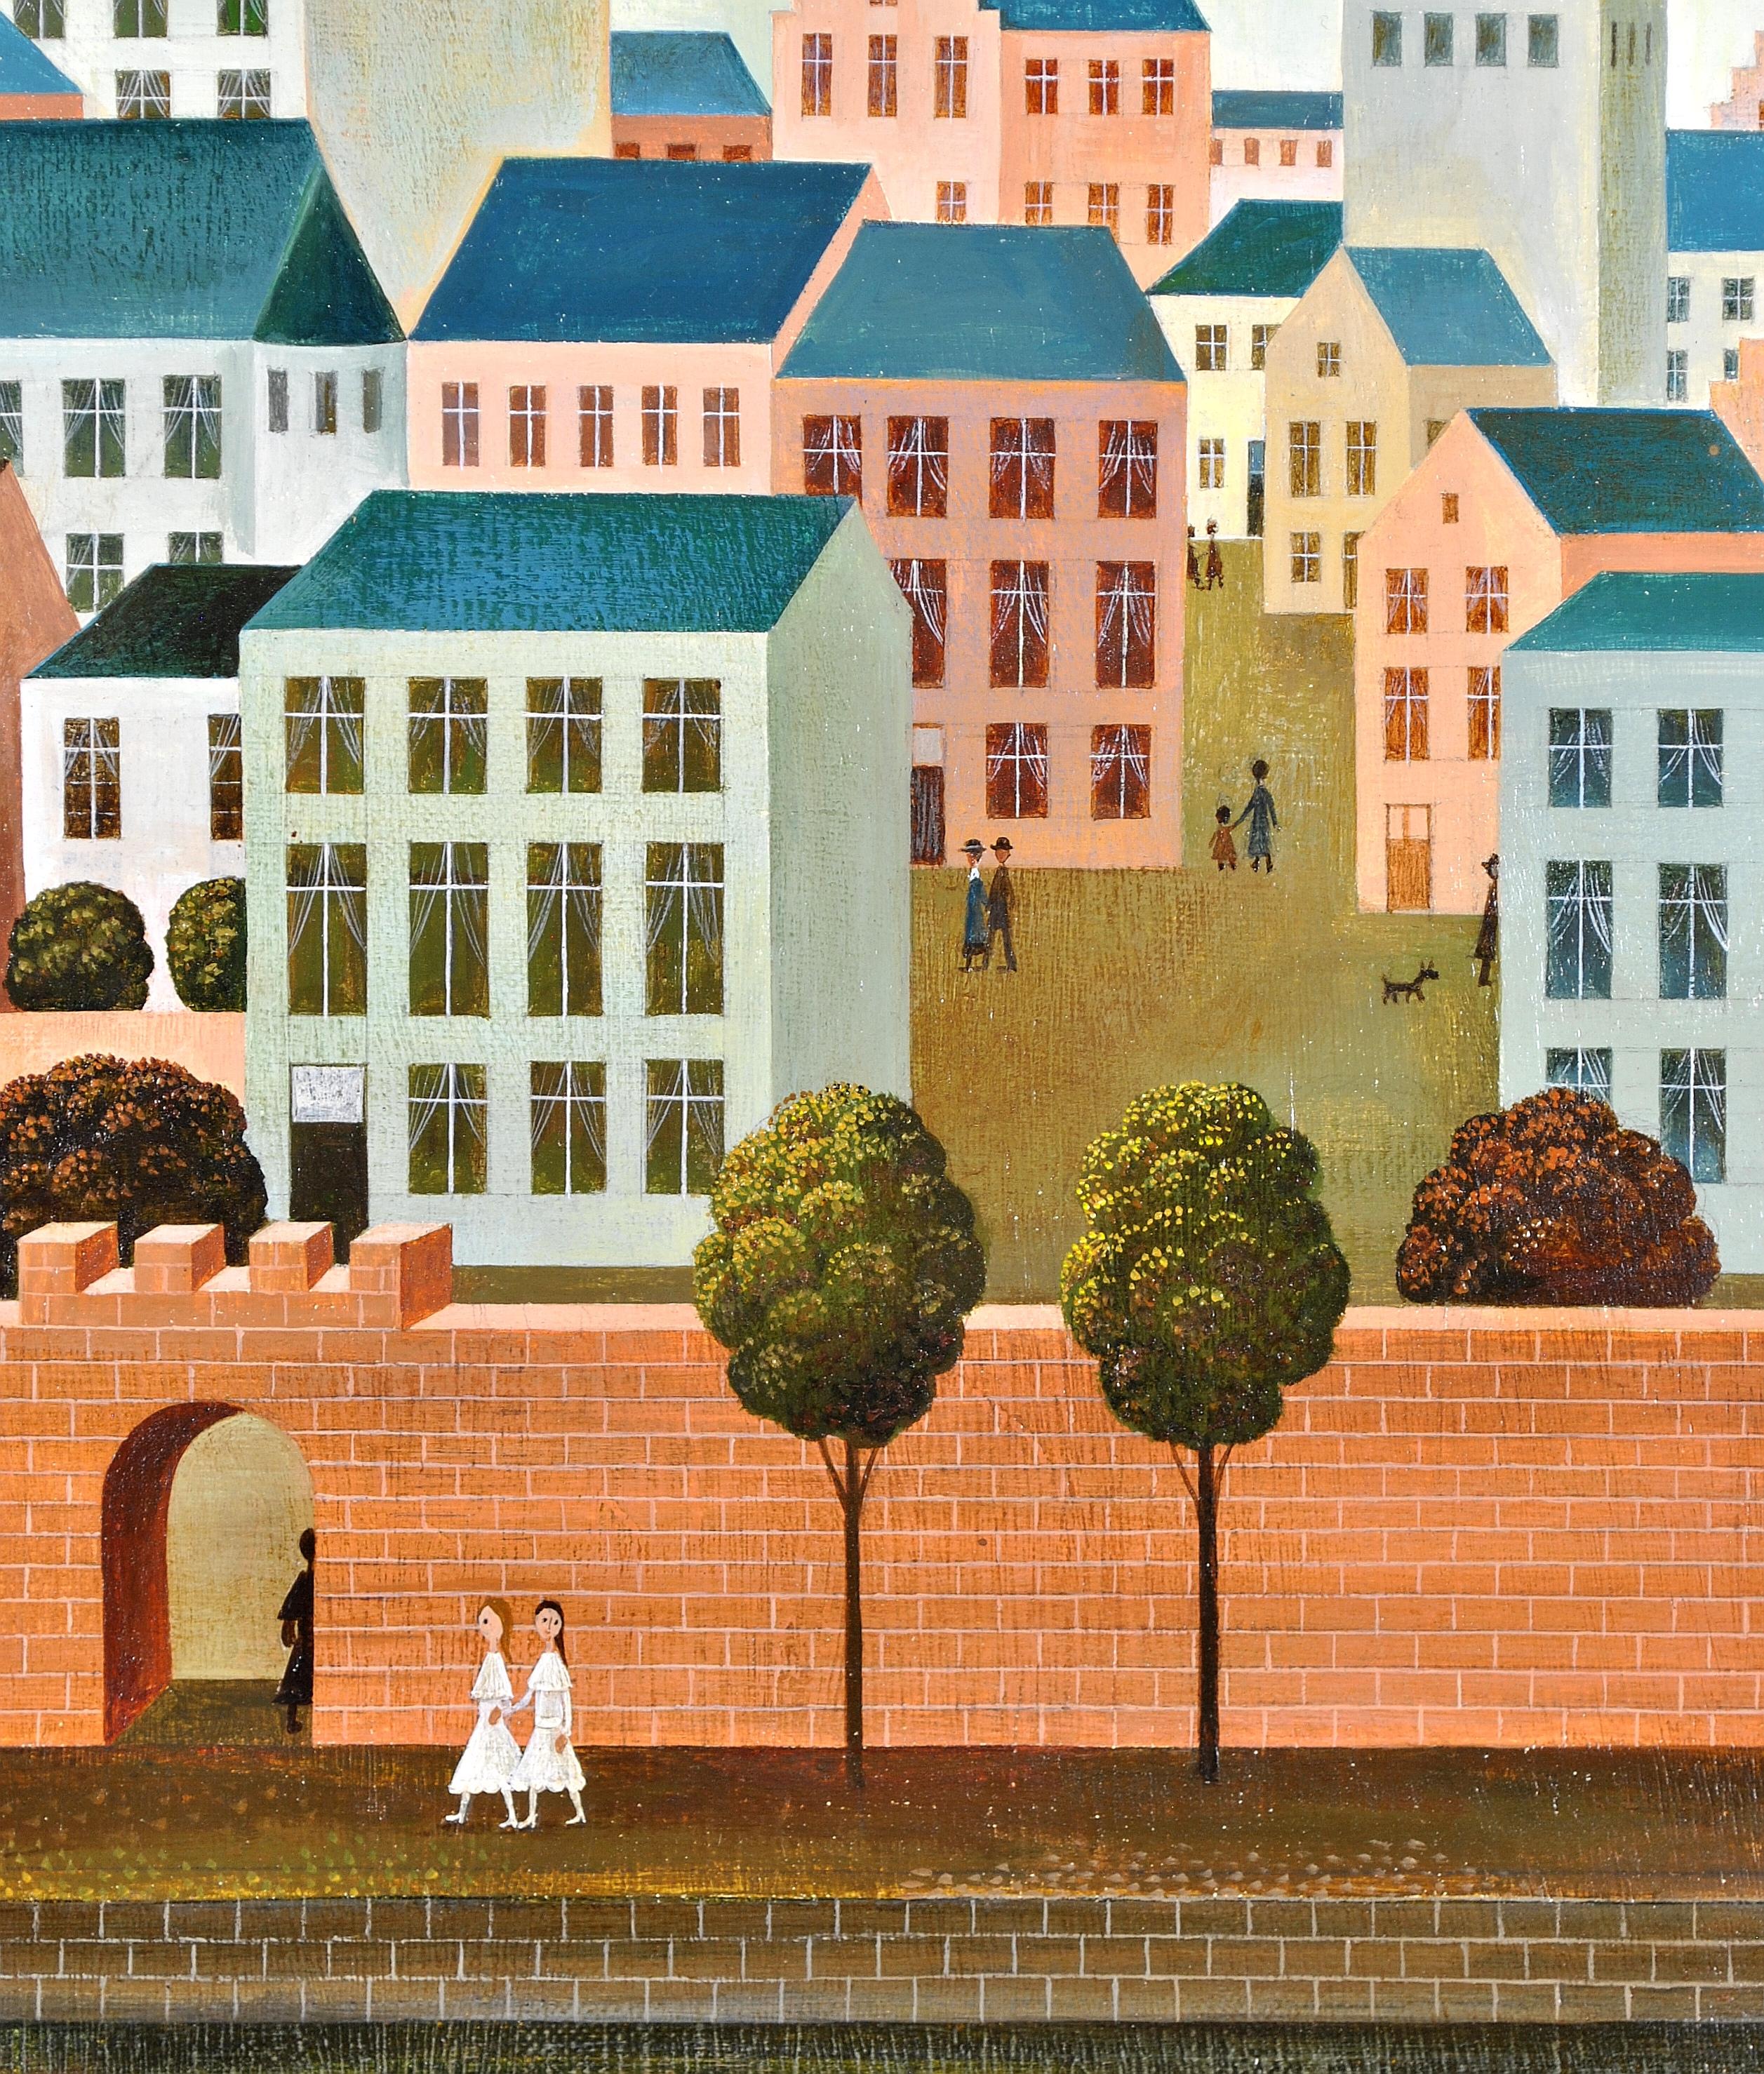 A beautiful mid 20th century oil on canvas by Belgian artist Suzanne Boland van de Weghe depicting figures in a walled town or city.

The work is very well painted in the naif Paris School style which was prevalent at the time and influenced by